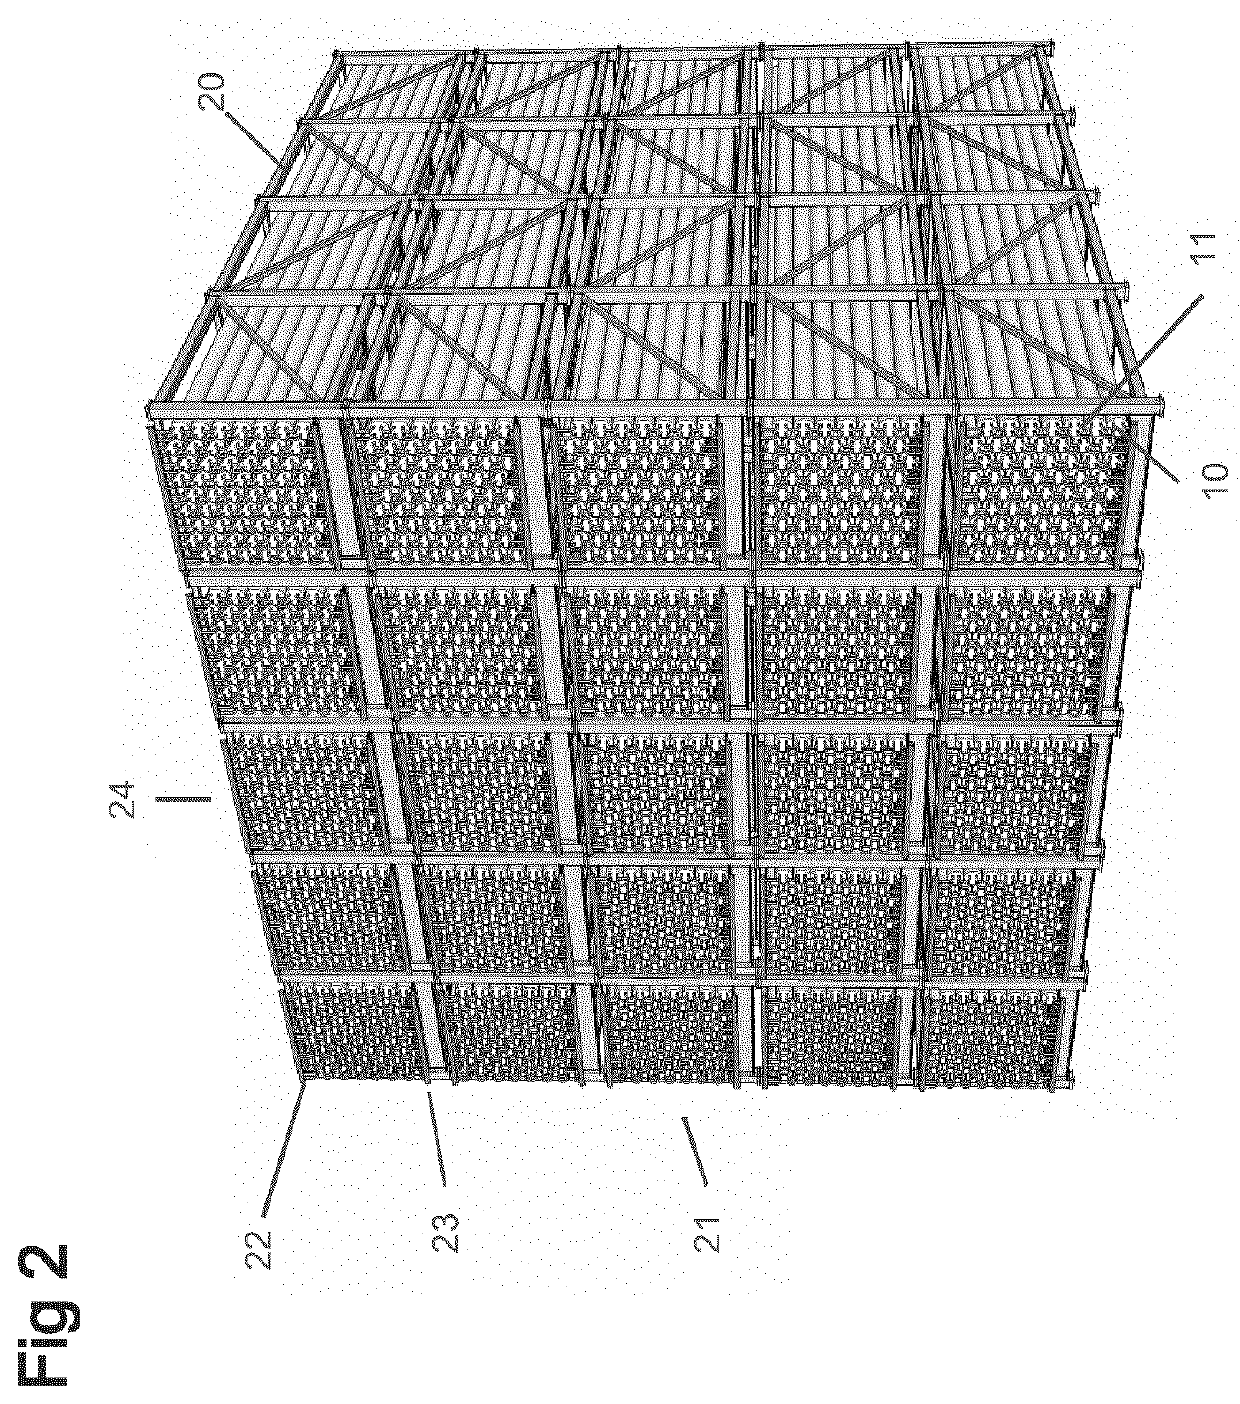 Modular thermal energy storage system, improved method of operation of such systems and use of the thermal energy storage system